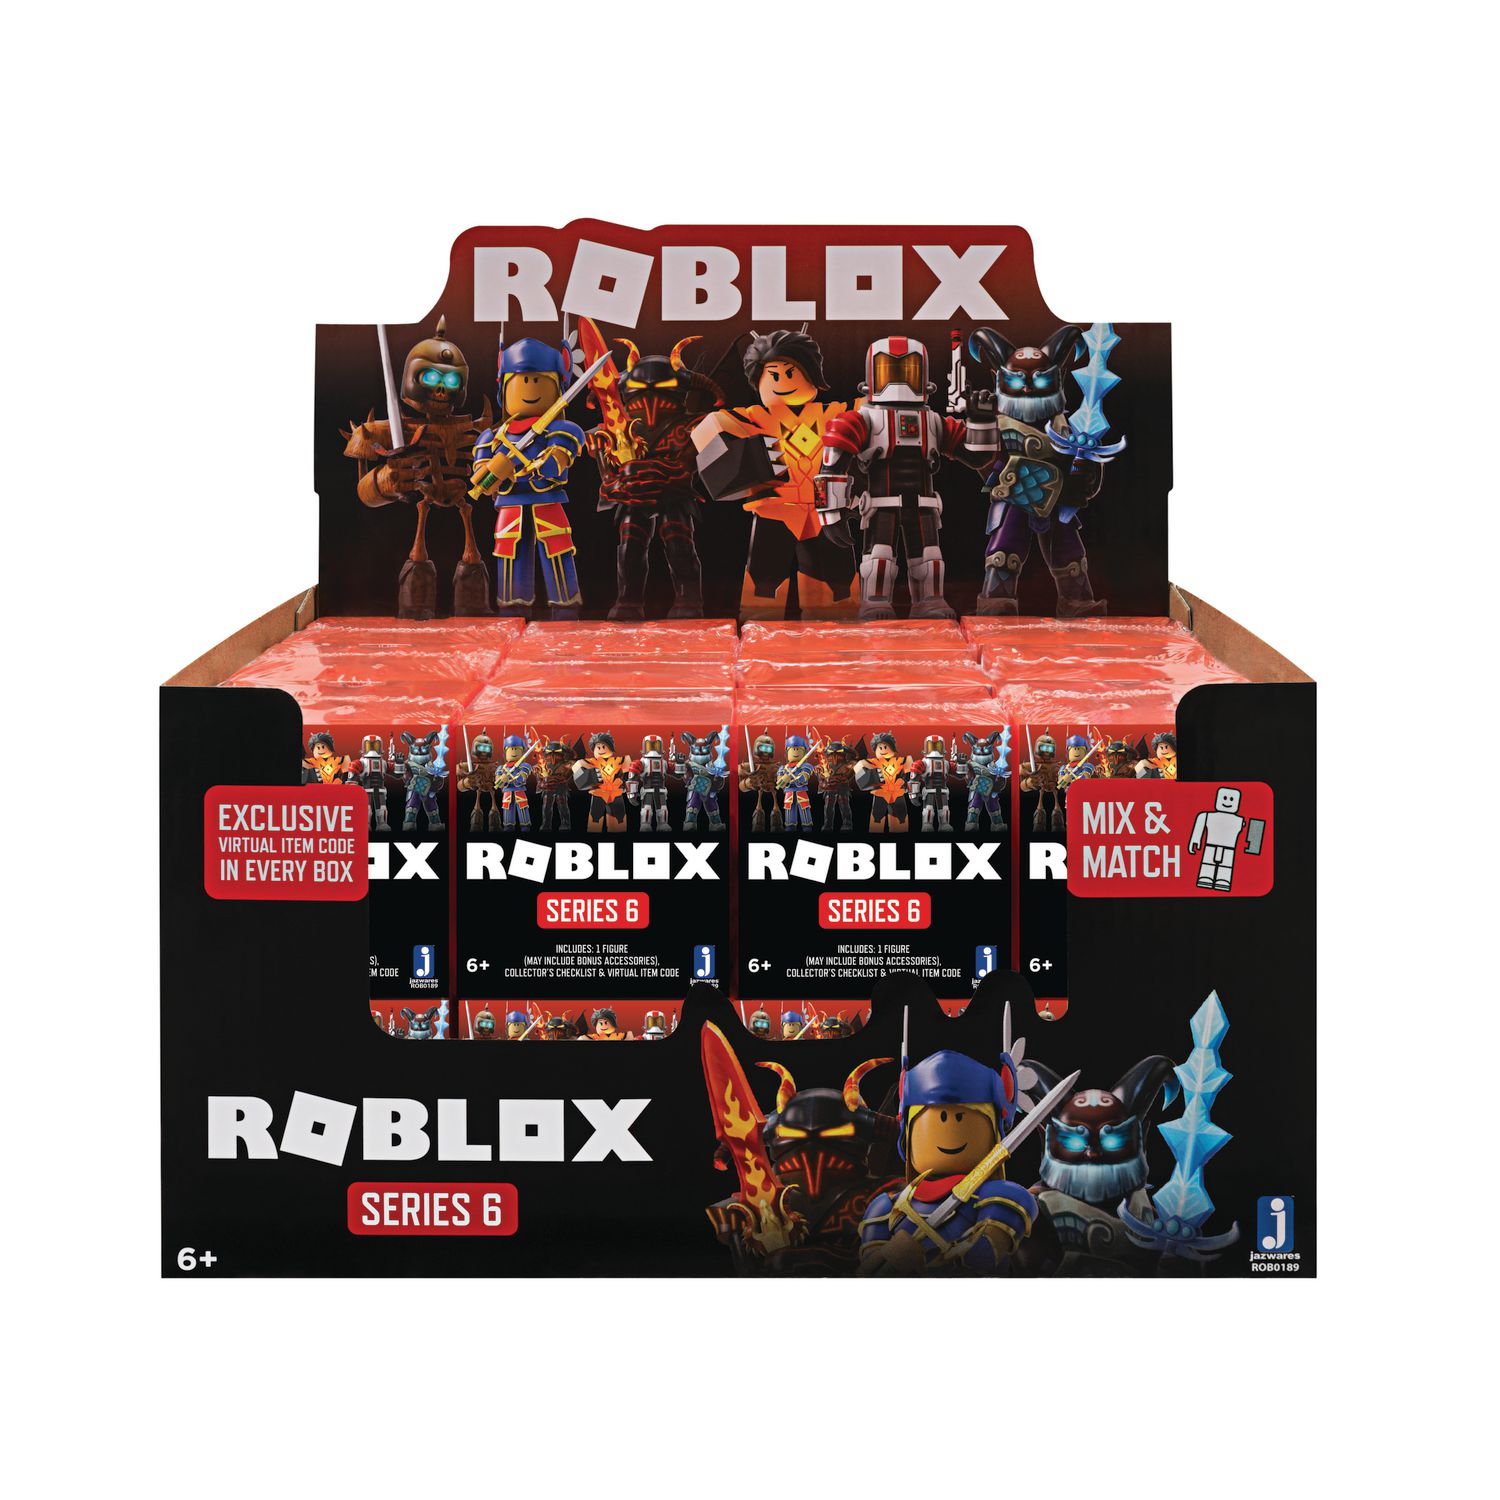 Tv Movie Video Games Jazwares With Virtual Item Captain Rampage New Roblox Series 1 Action Figure Toys Hobbies - jazwares roblox plastic tv movie video game action